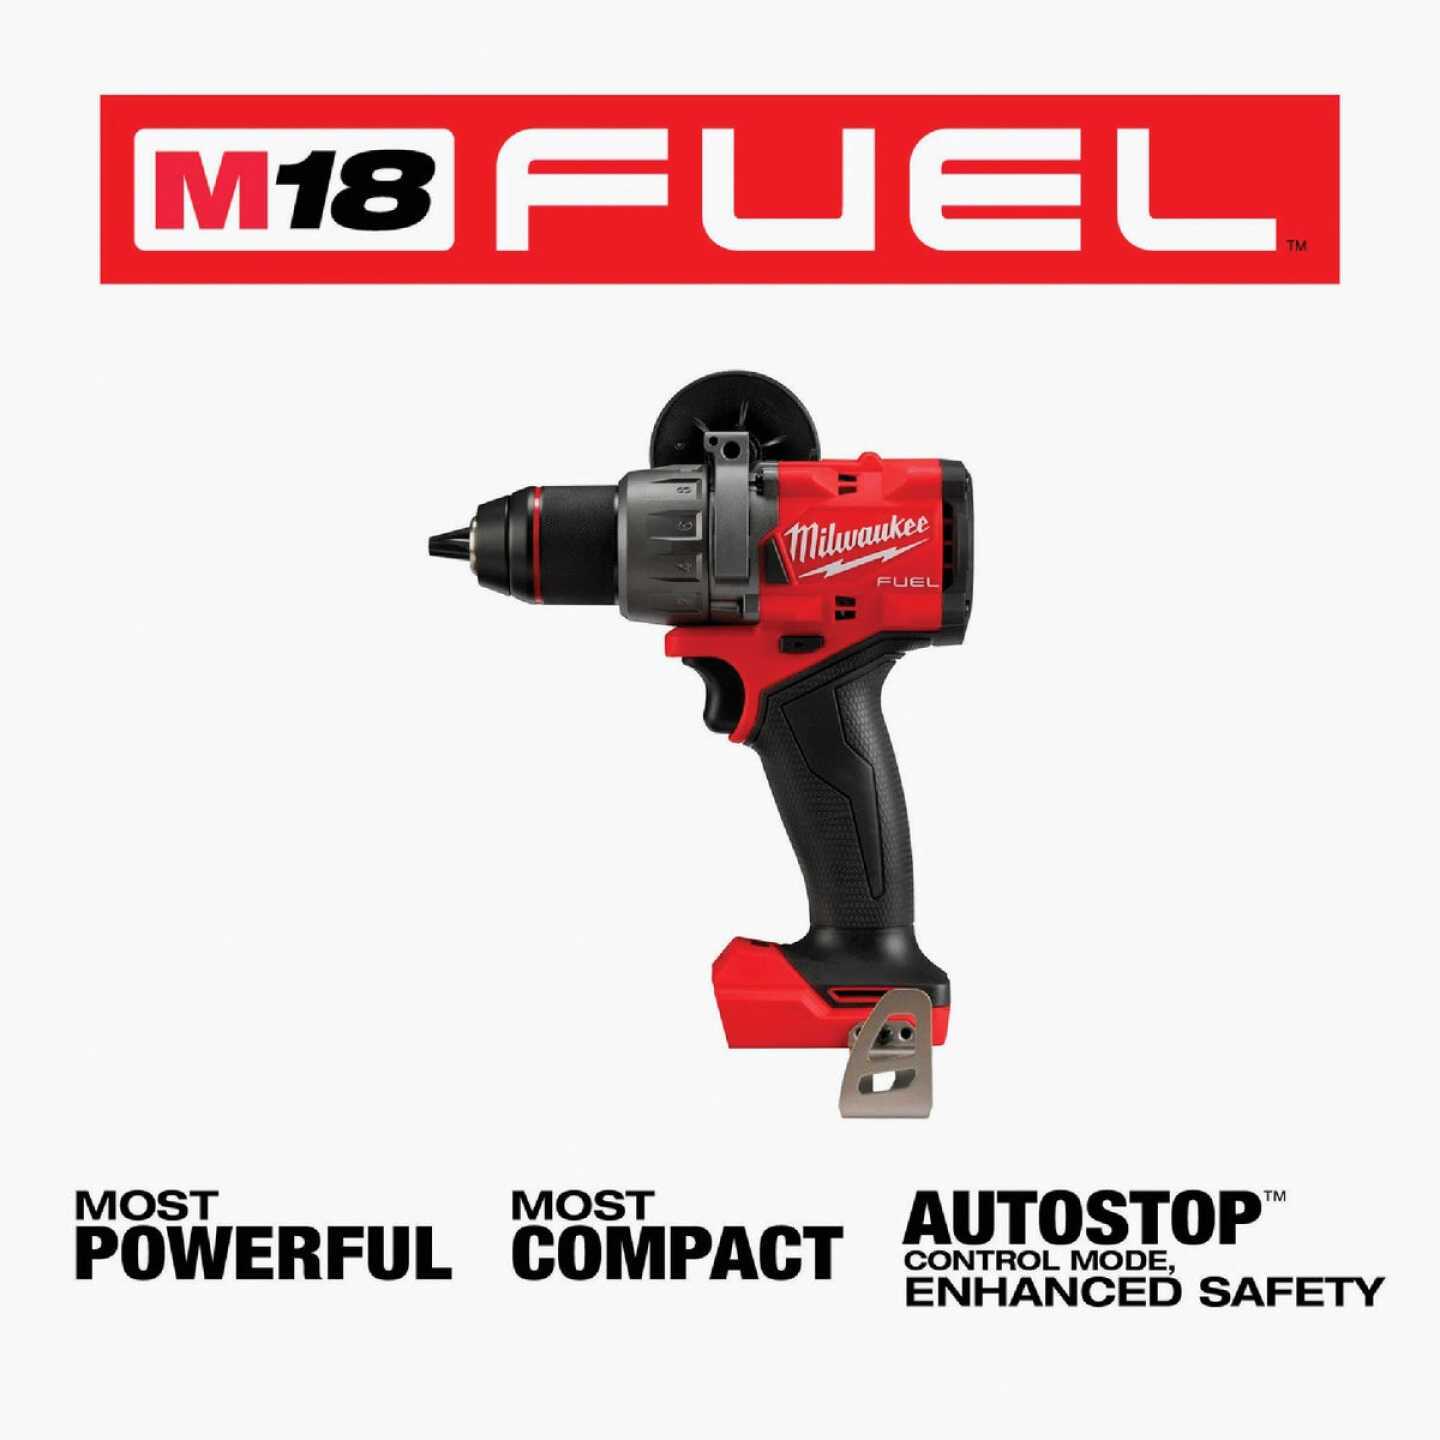 Milwaukee M18 FUEL Brushless 1/2 In. Cordless Hammer Drill/Driver